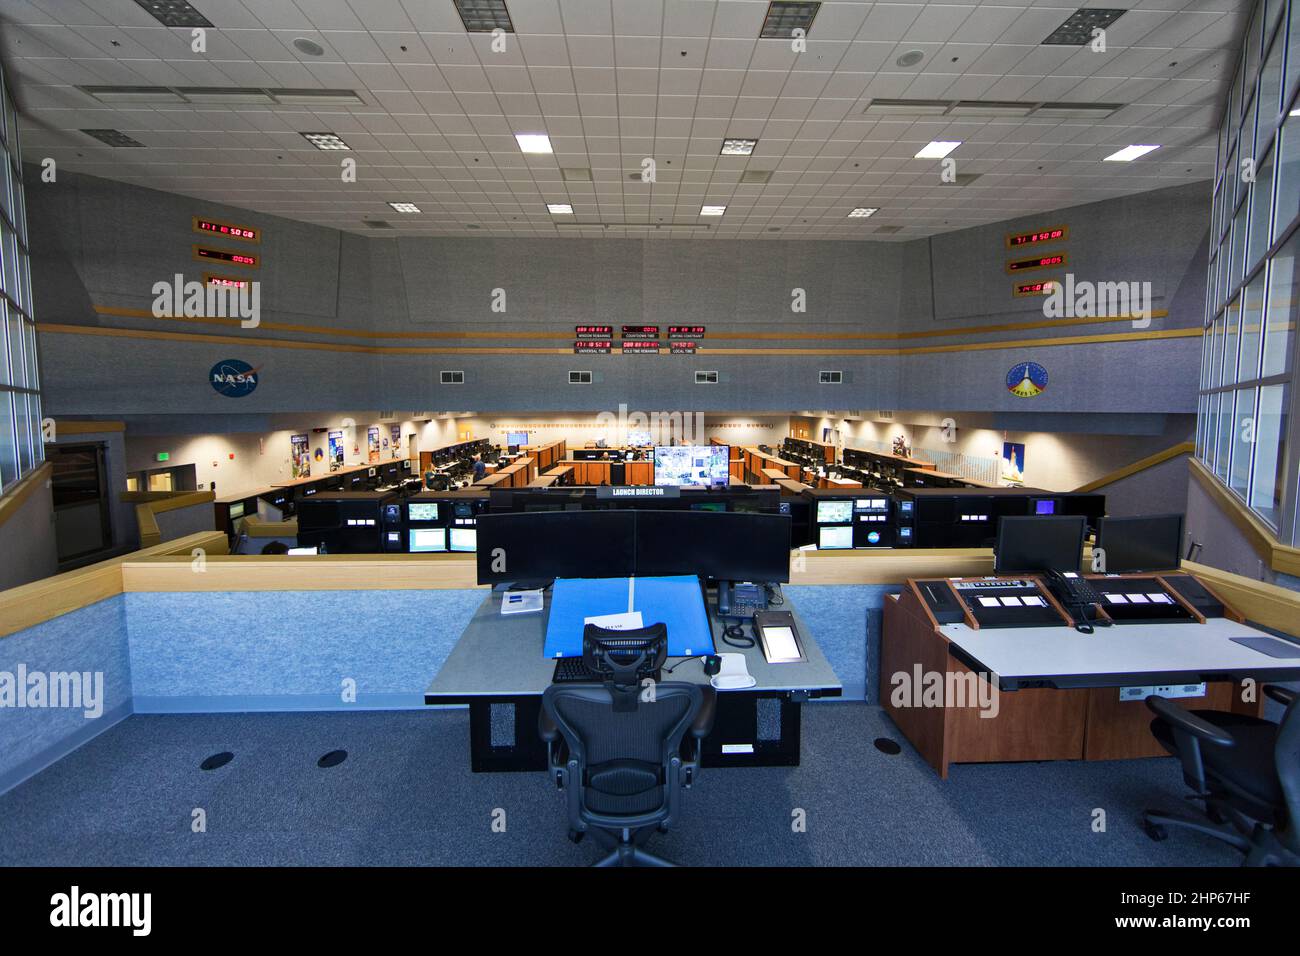 A view of Firing Room 1 in the Launch Control Center (LCC) at NASA's Kennedy Space Center in Florida. The Apollo and shuttle-era firing rooms in the LCC have been upgraded. The upper deck includes a work station in development for the EM-1 launch director. Exploration Ground Systems upgraded Firing Room 1 to support the launch of NASA's Space Launch System rocket and Orion spacecraft on Exploration Mission-1 and deep space missions. Stock Photo